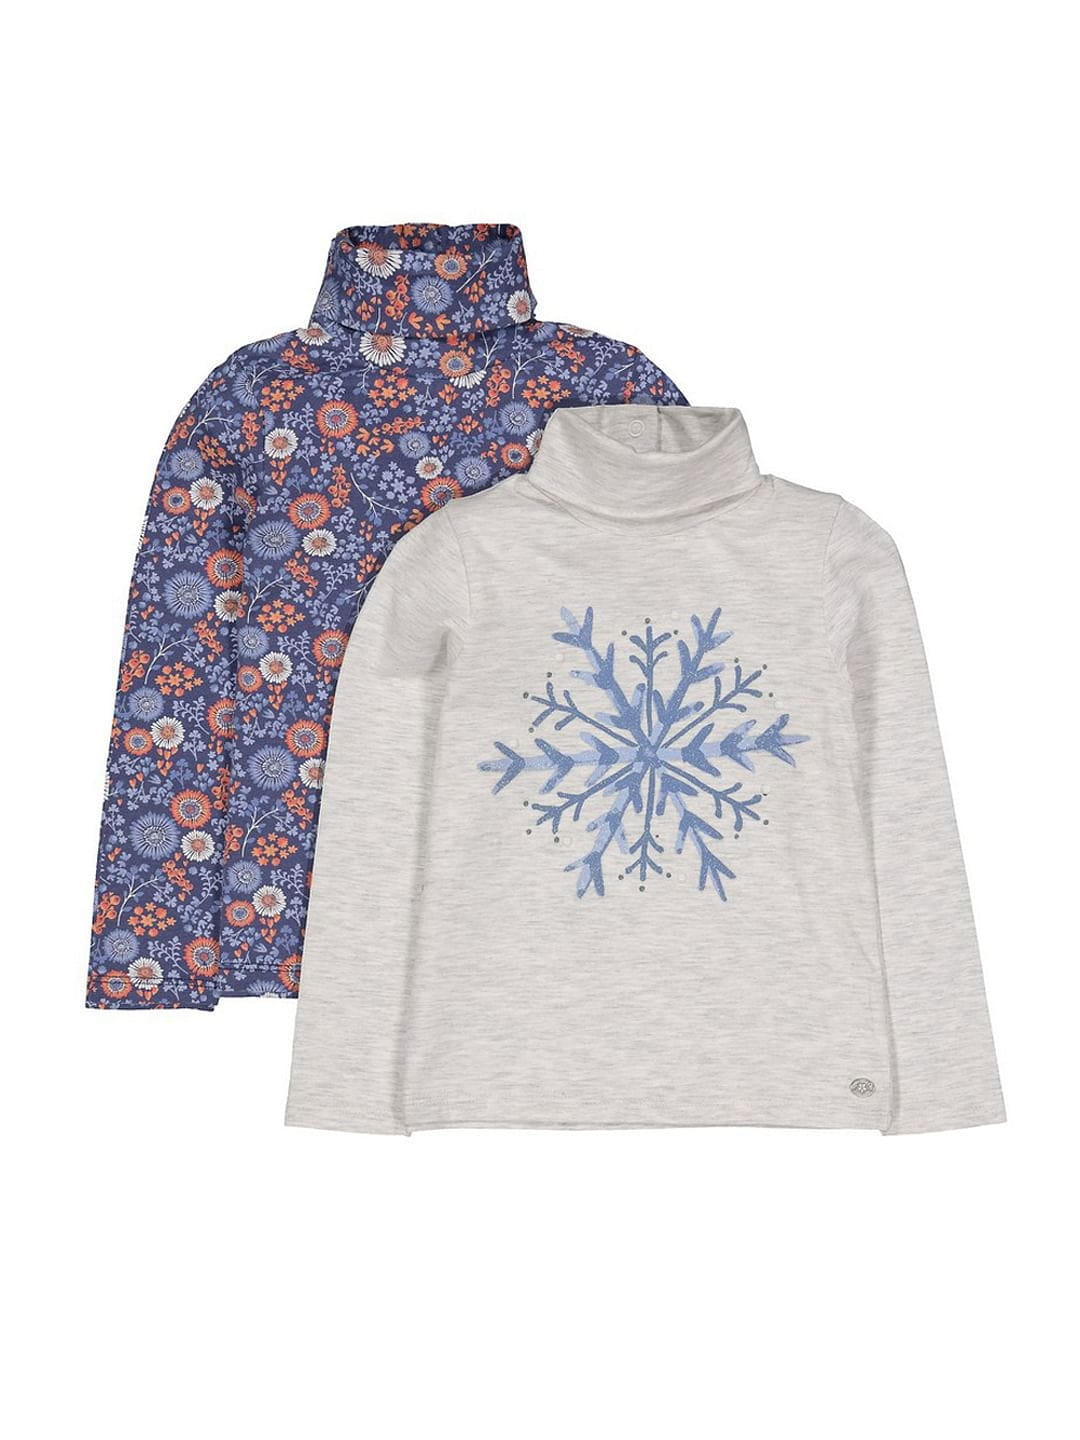 Mothercare | Snowflake Floral Roll Neck Tops - 2 Pack 0